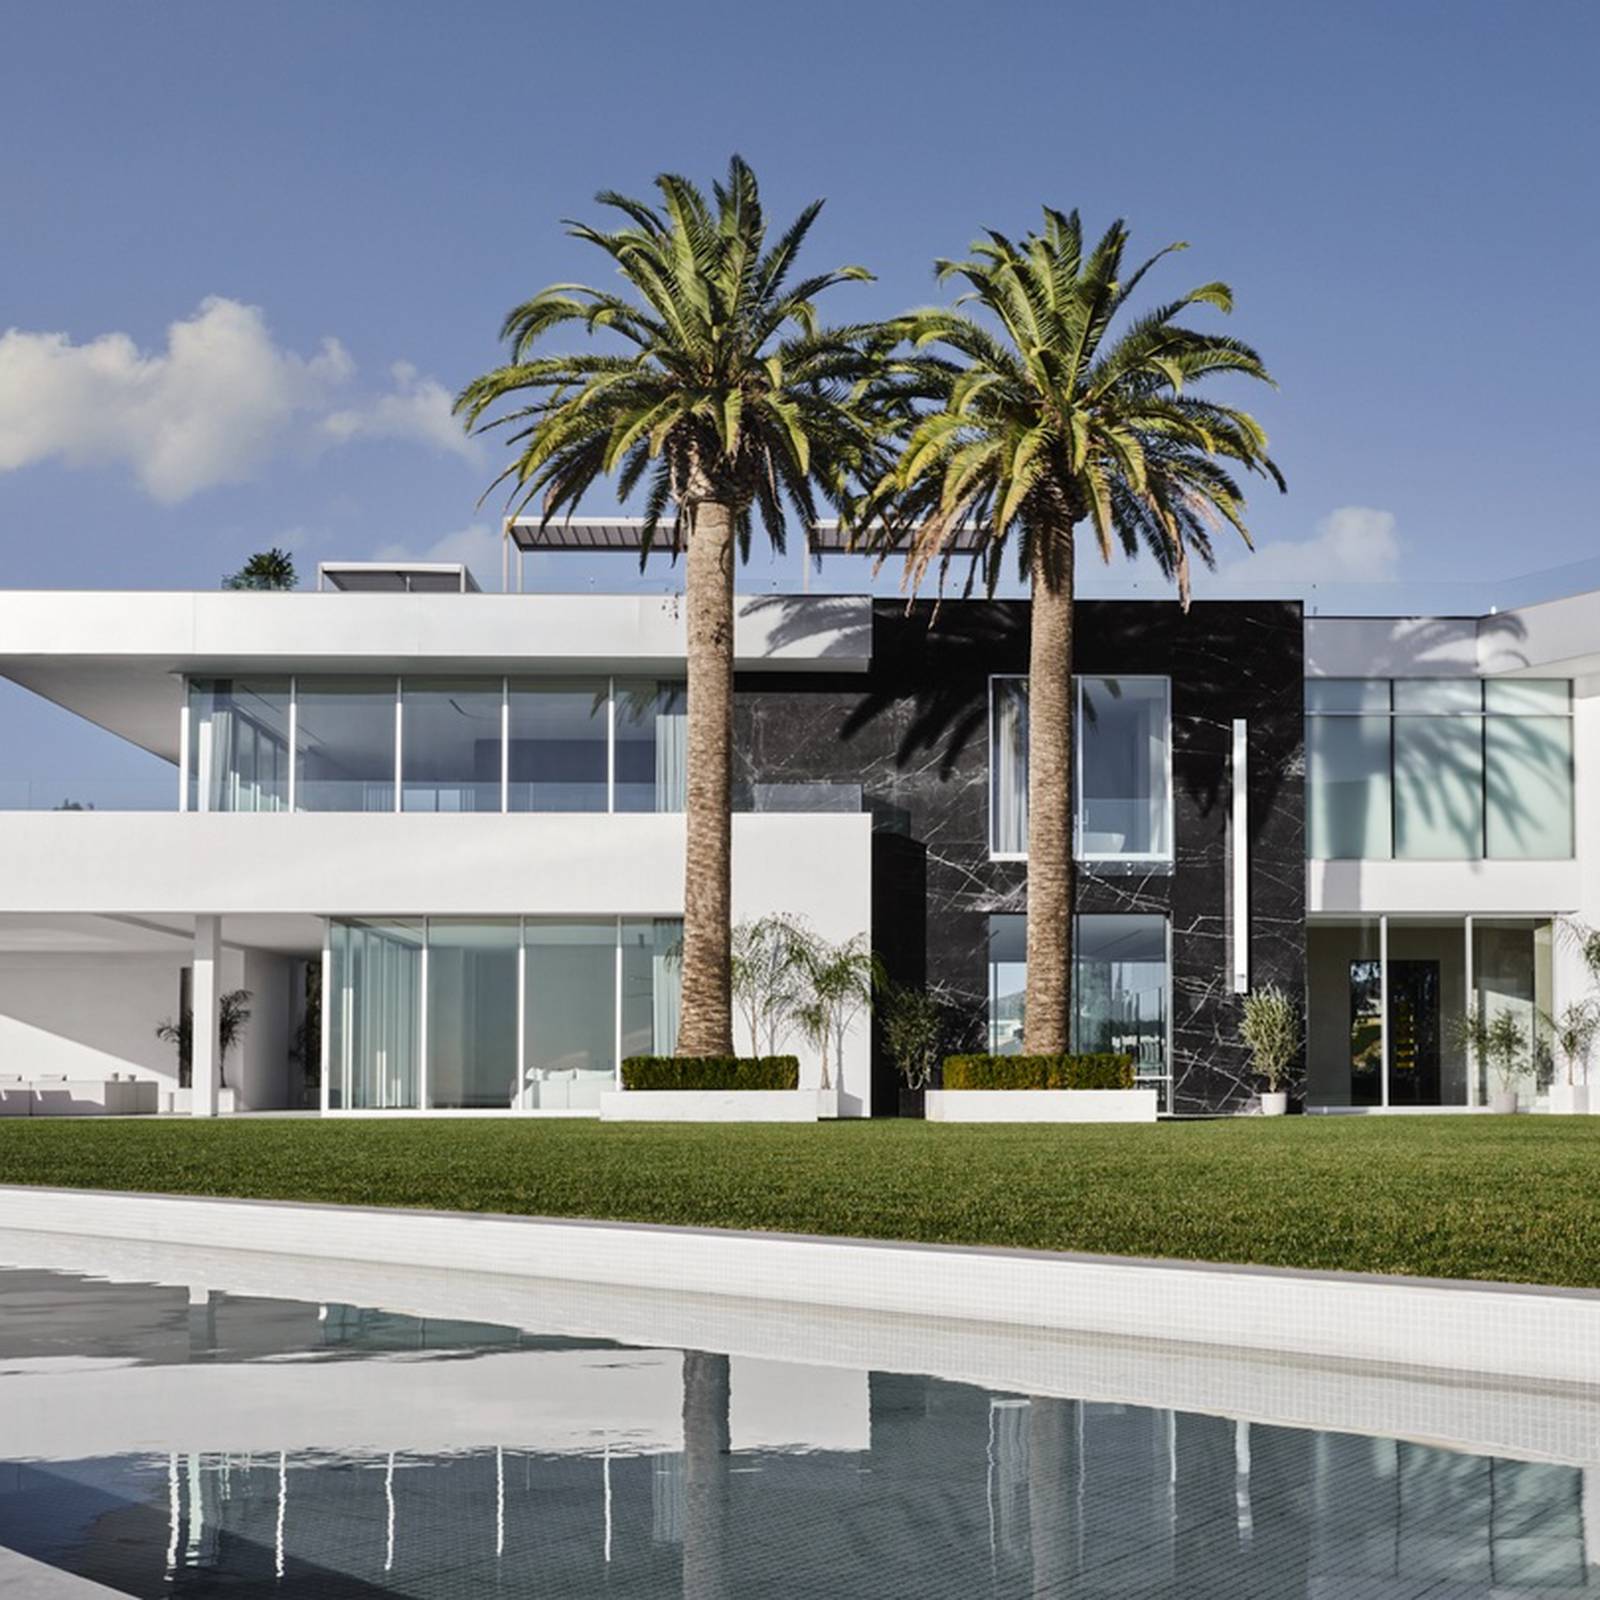 Beyoncé and Jay-Z's Architect Building $500 Million Mansion in Bel Air